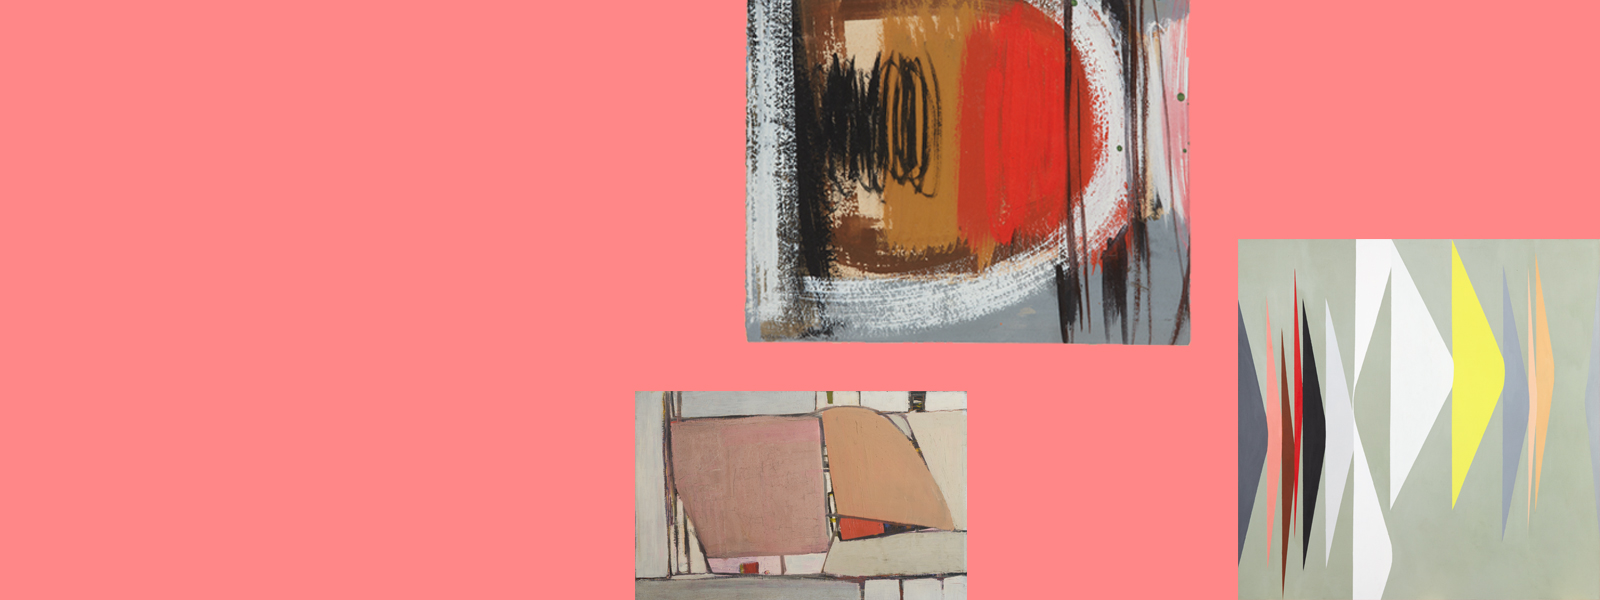 Three paintings grouped on a salmon background. From left to right: an oil painting of two rounded edge squares in pale pink and orange on a white background; a gouache painting of loose vertical brushstrokes in black brown and red with a large white 'D' shaped brushstrokes; an acrylic painting of elongated triangles touching, all pointing towards centre of the right edge, in greys, pinks, black, white and yellow